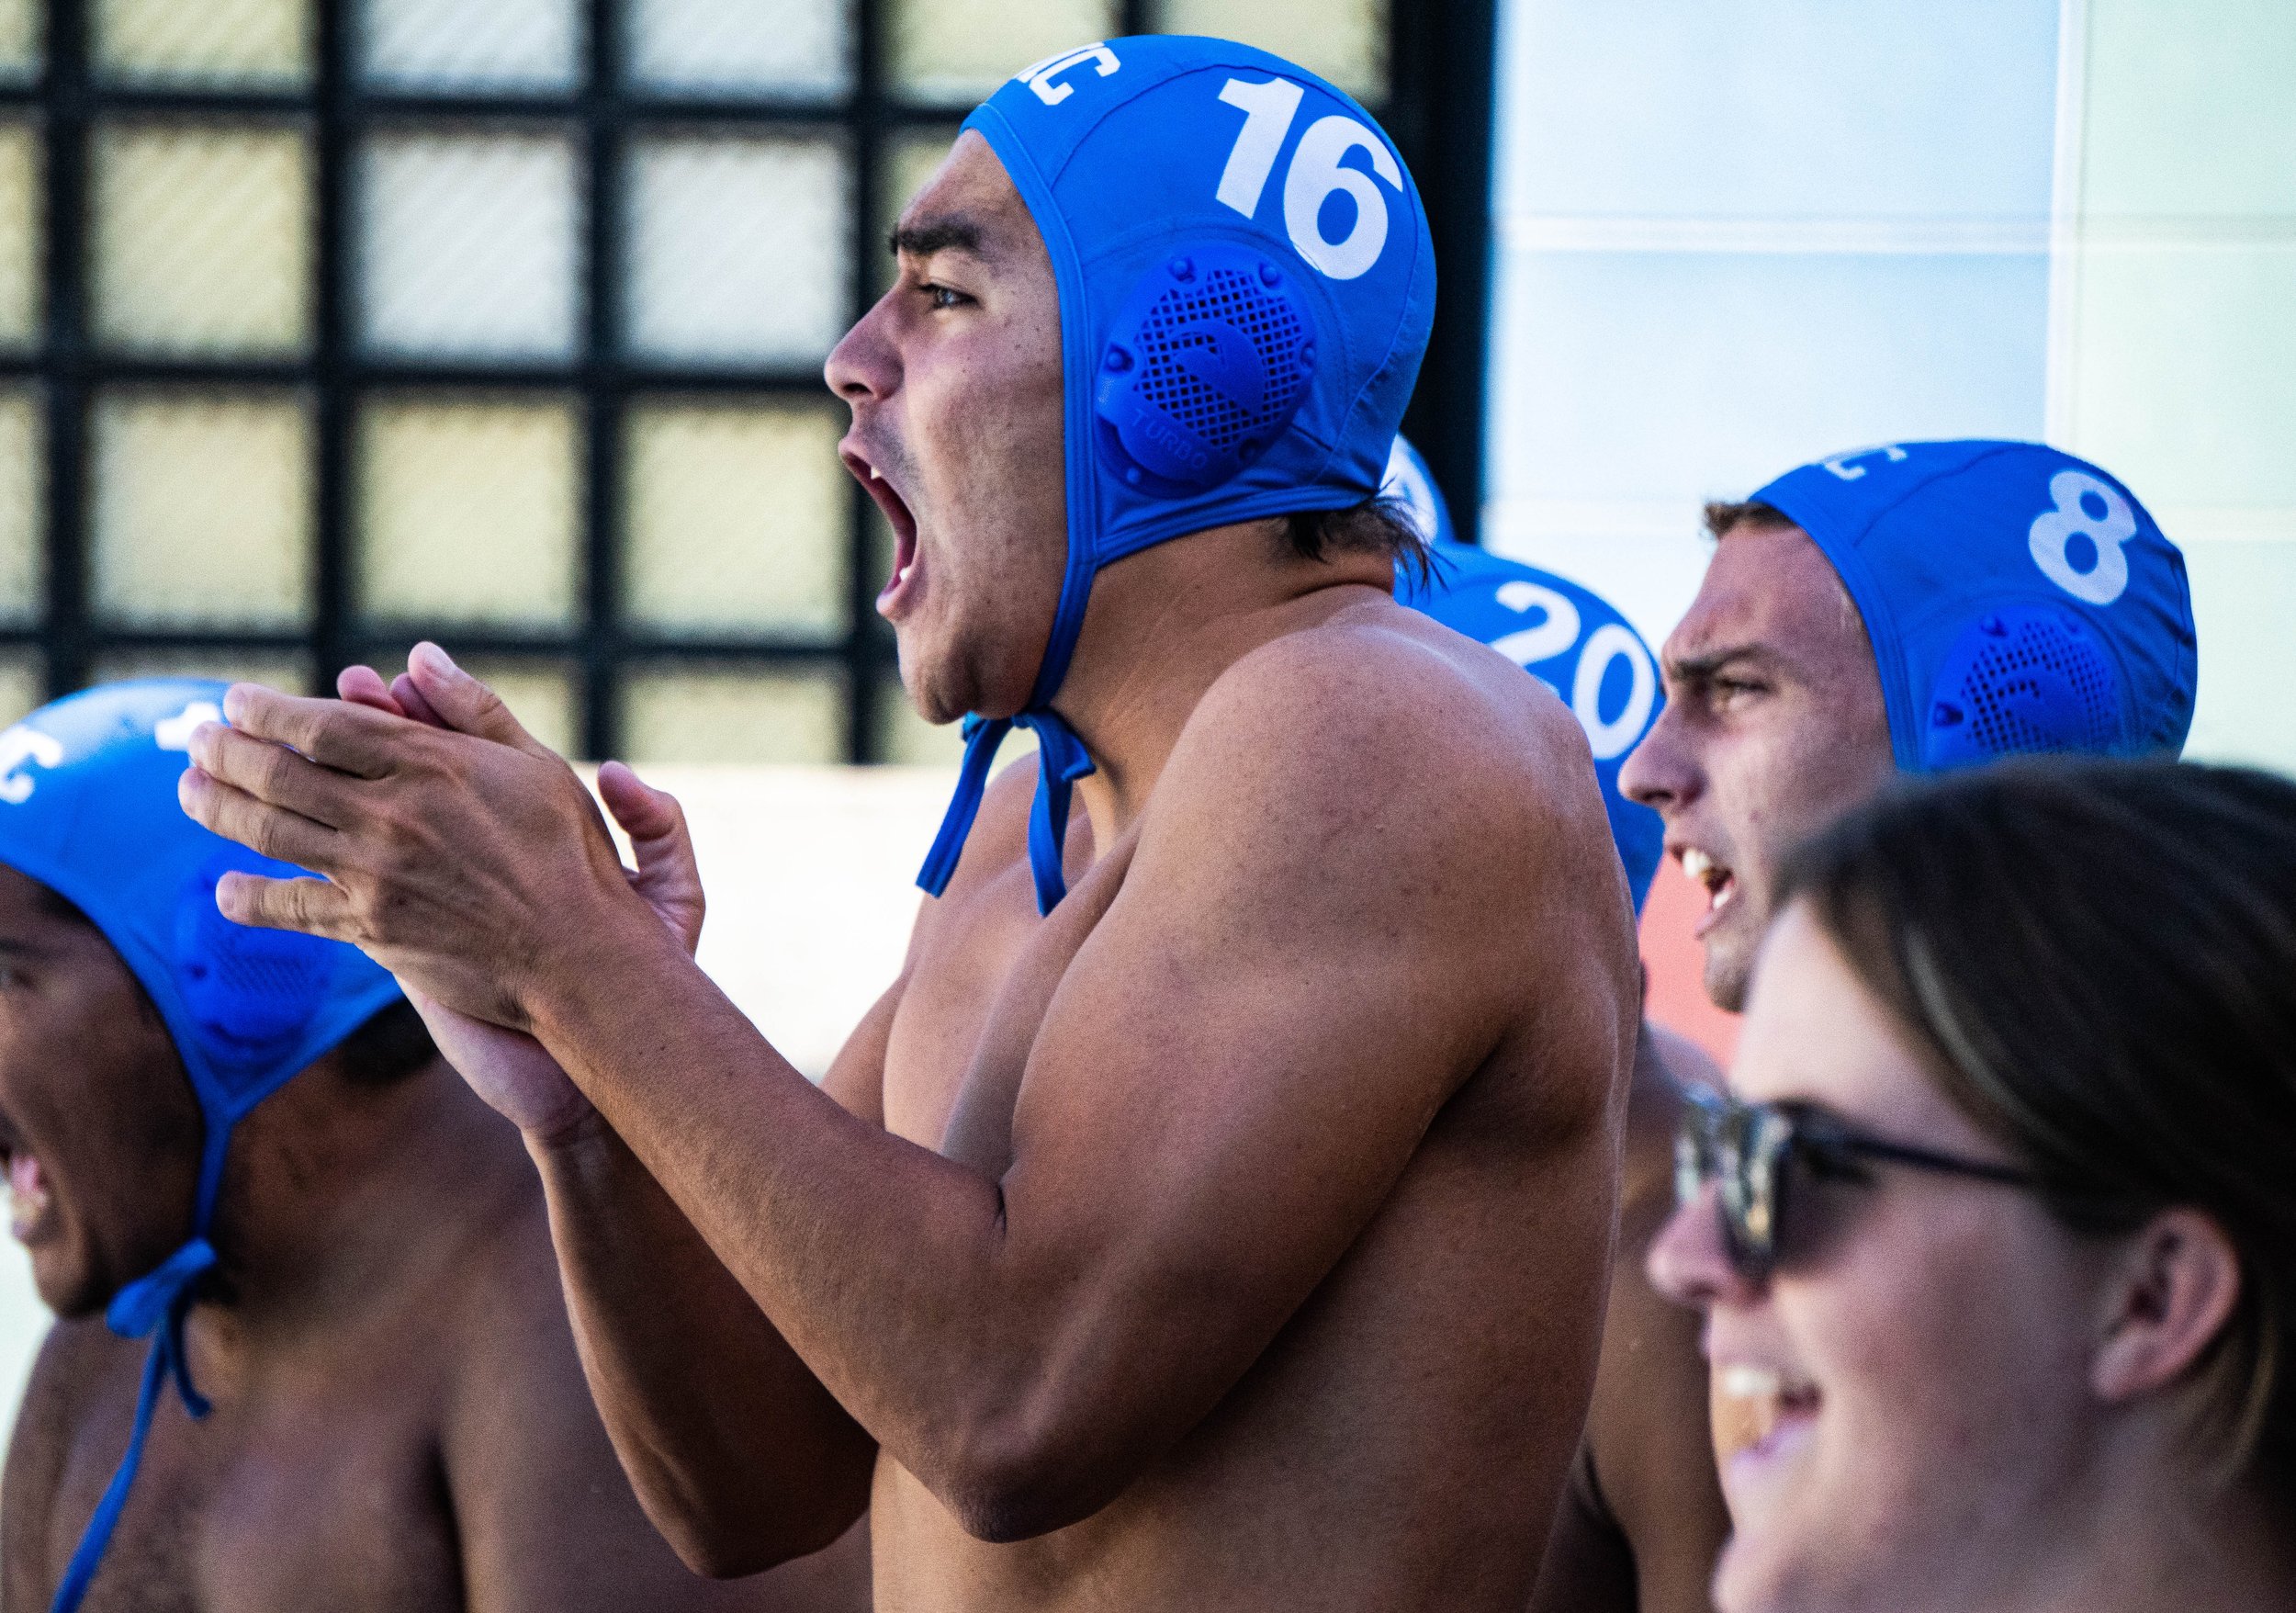  Santa Monica College Corsair Men's Water Polo  Driver, Hiro Inoki cheers for his team mates from the sidelines during their match against the LA Valley Monarchs on Sept. 28, 2022. The Corsairs lost to The Monarchs 23-4. Santa Monica, Calif. (Ee Lin 